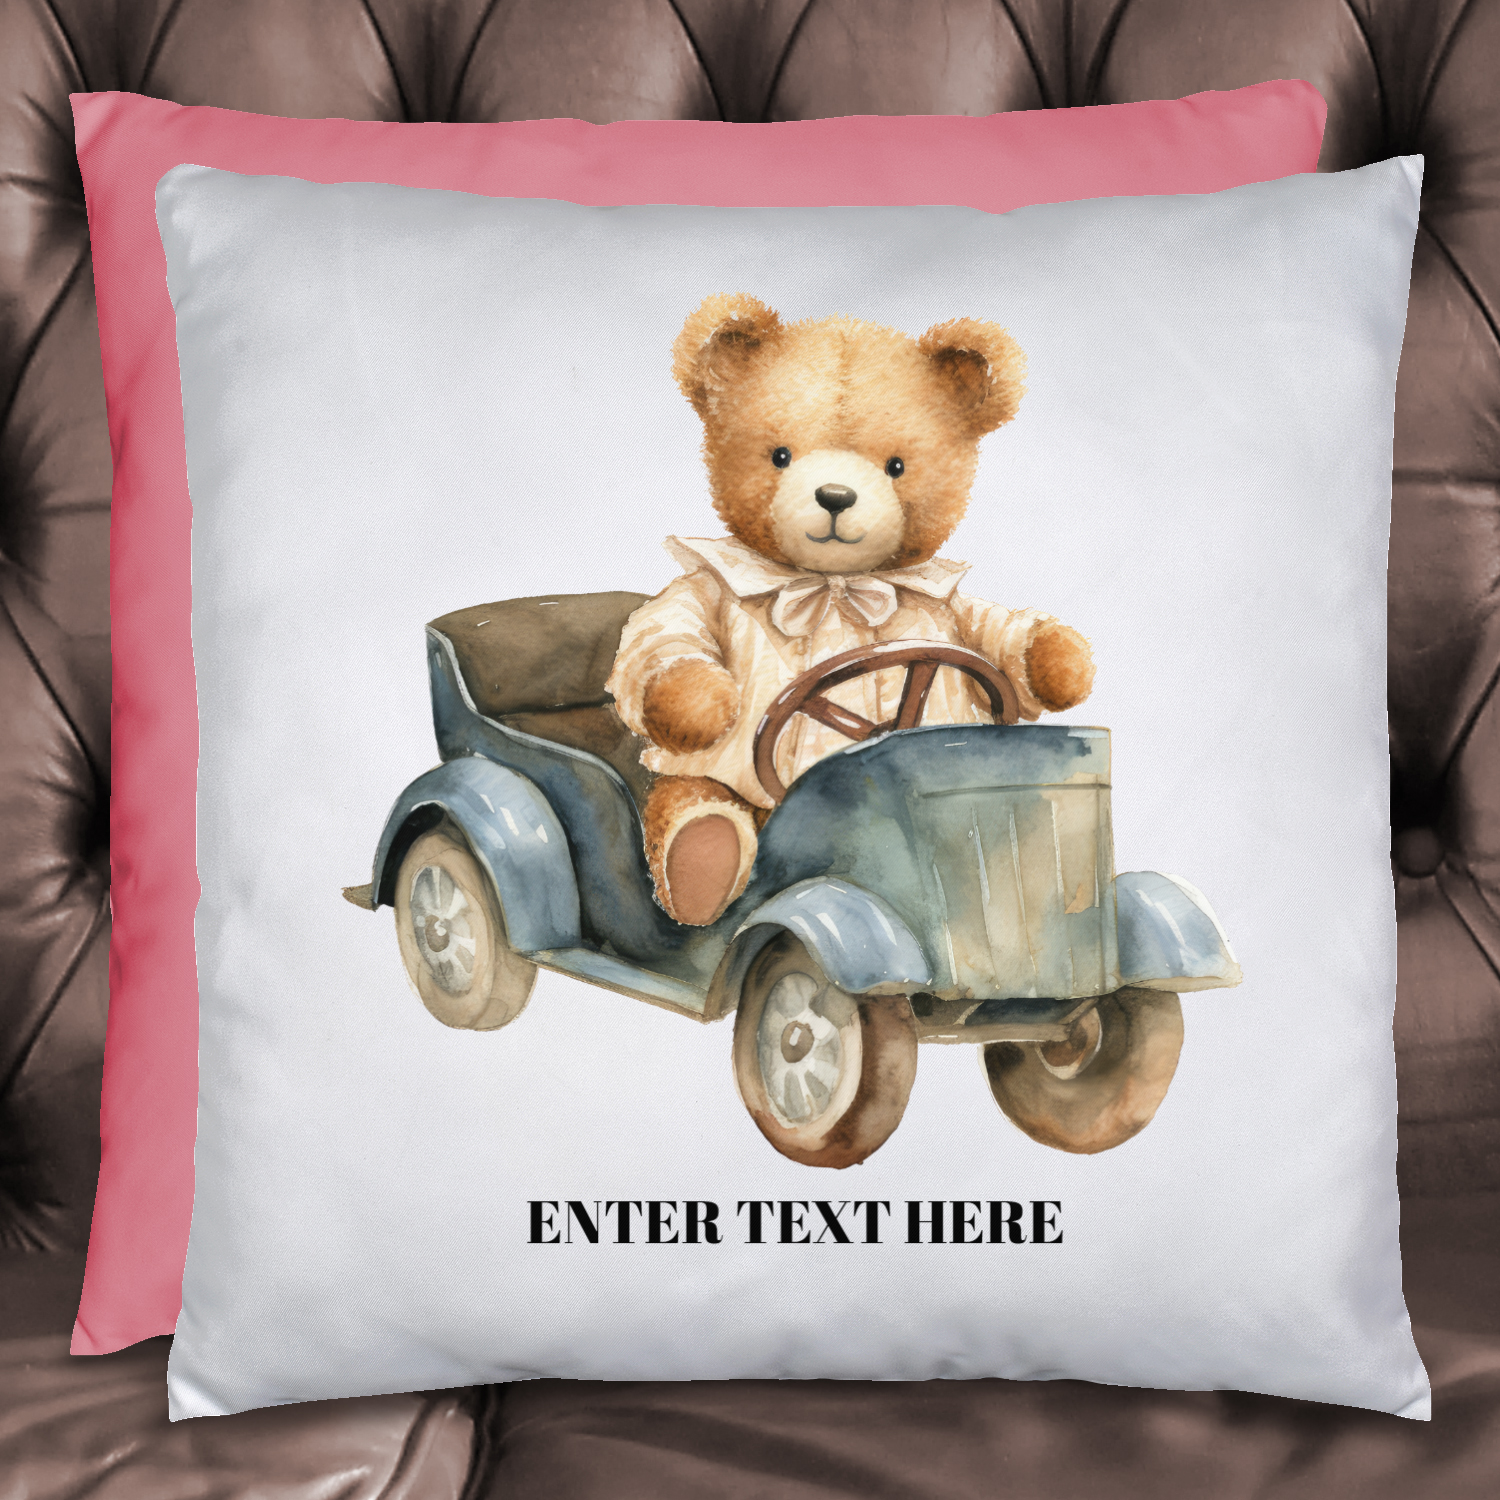 Personalized Throw Pillow - Personalized Teddy Bear Pillow 